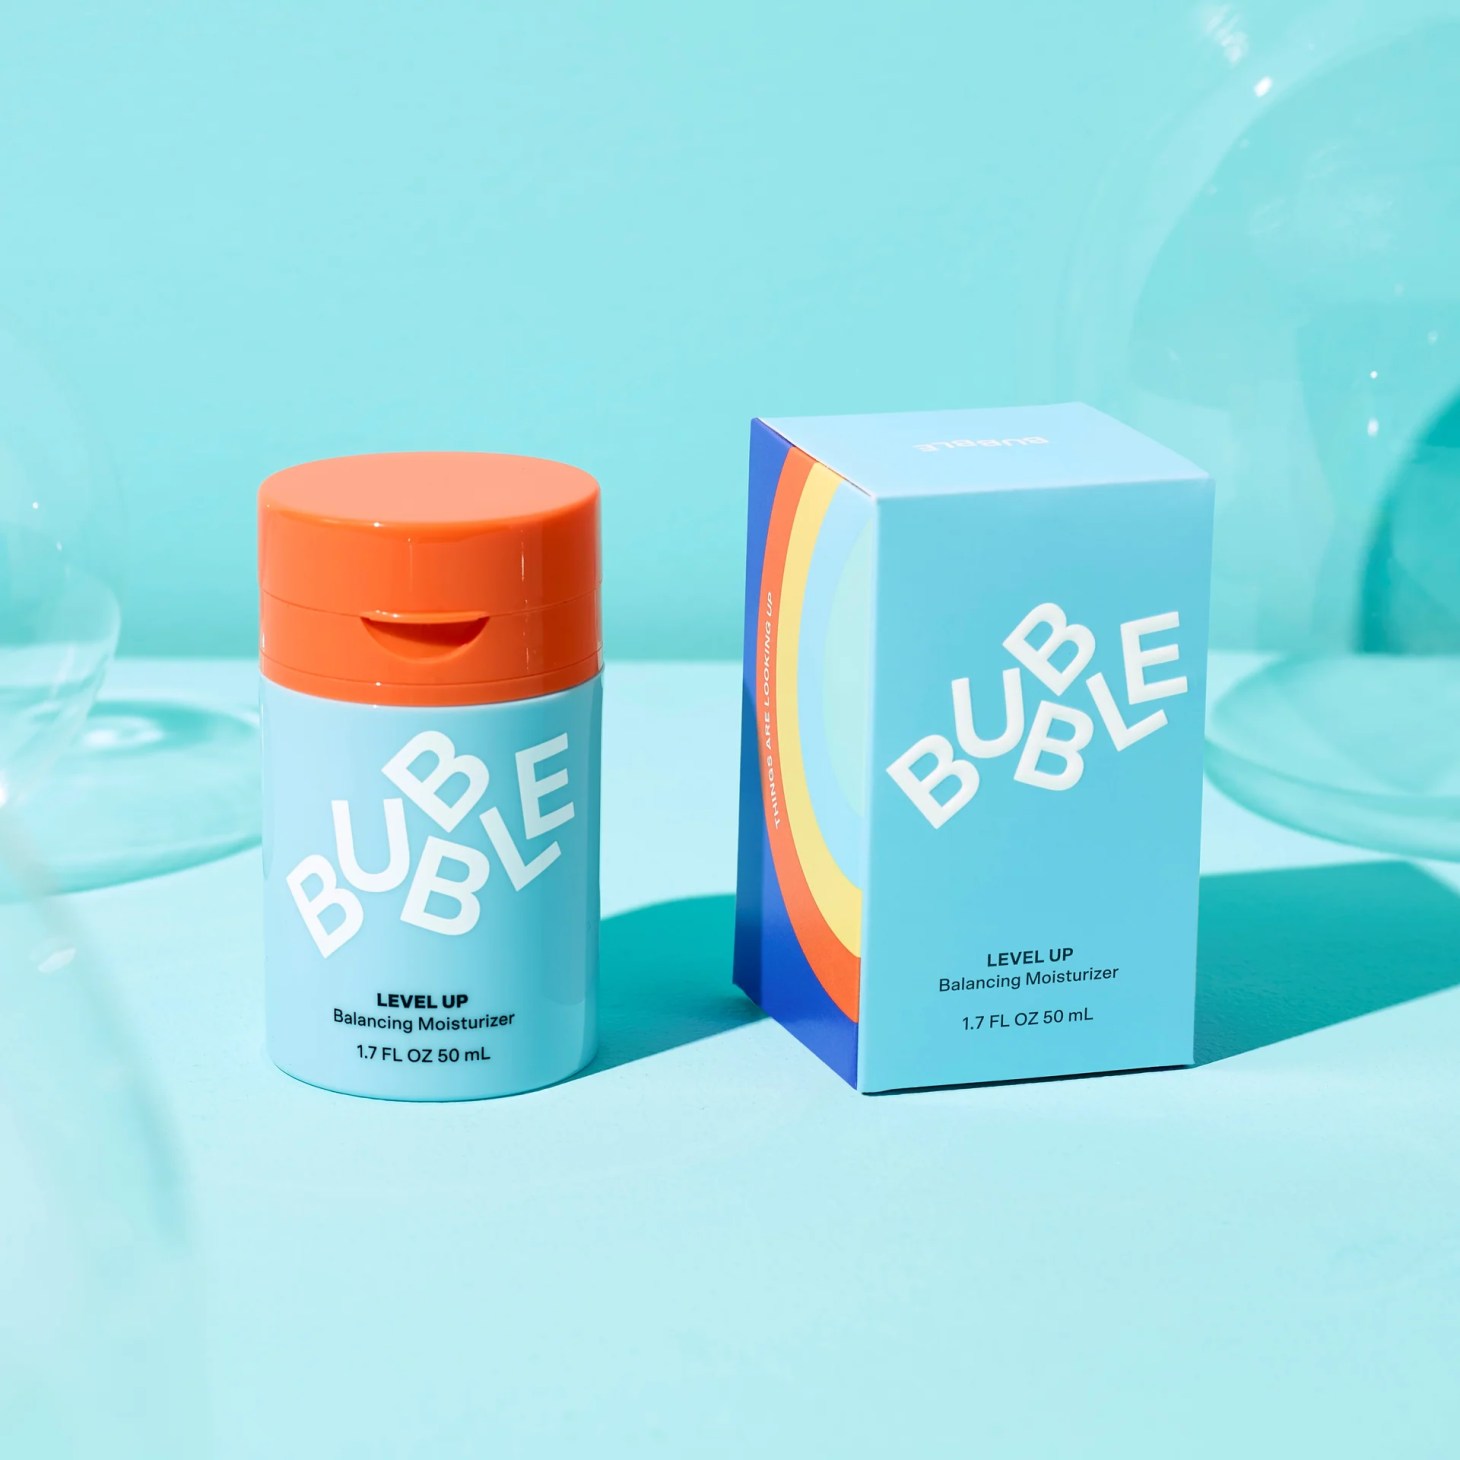 level up bubble moisturizer and box on a blue background